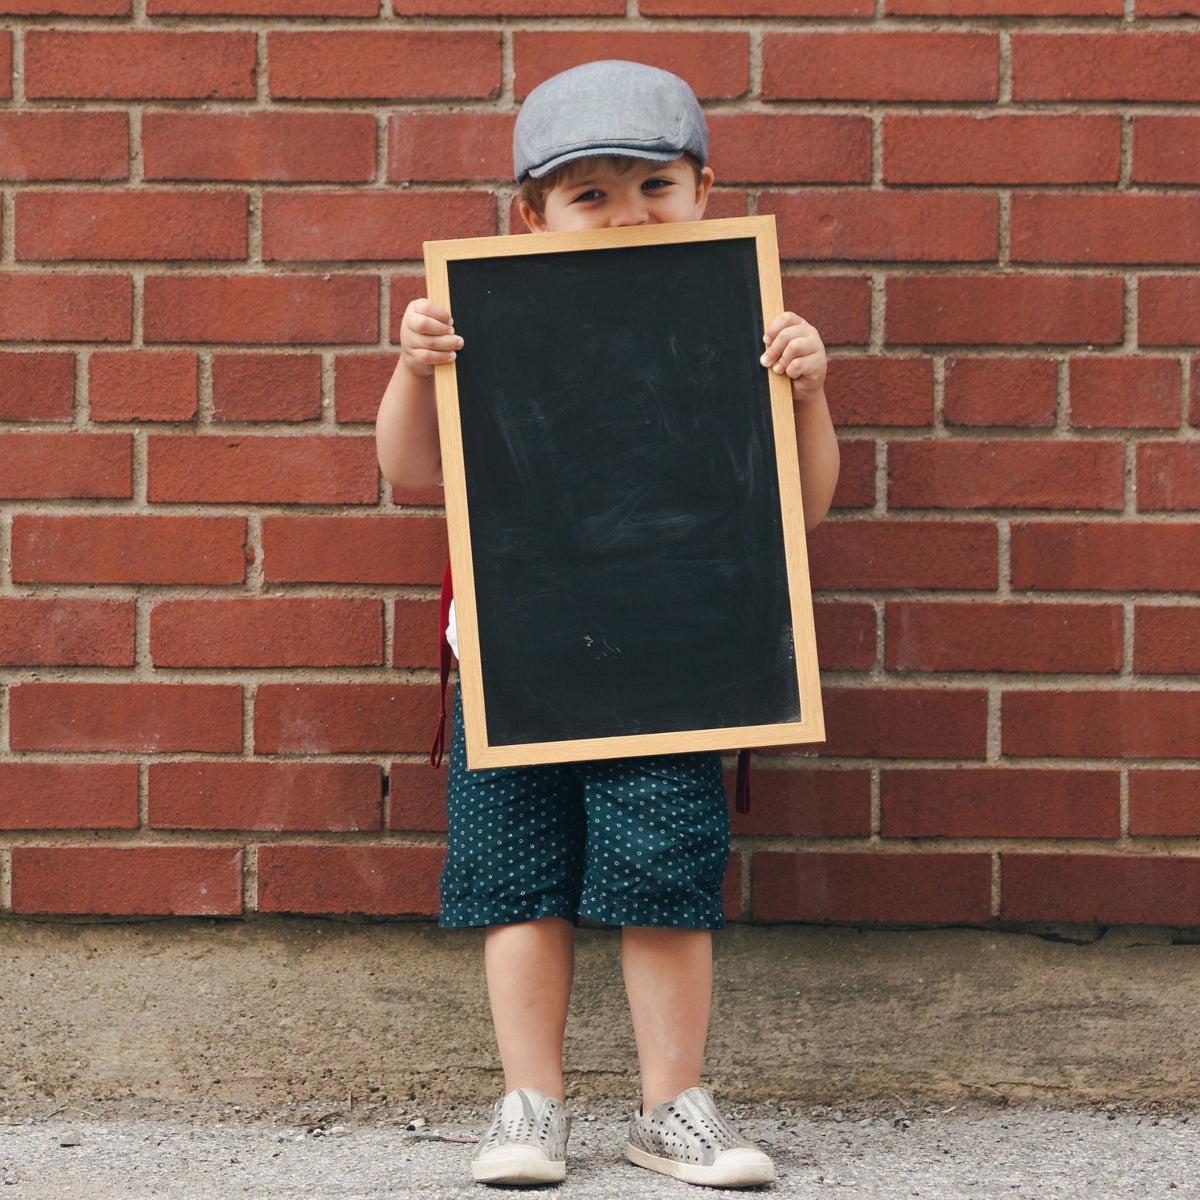 Image of a small child holding a wooden chalkboard standing against a red brick wall and wearing a hat